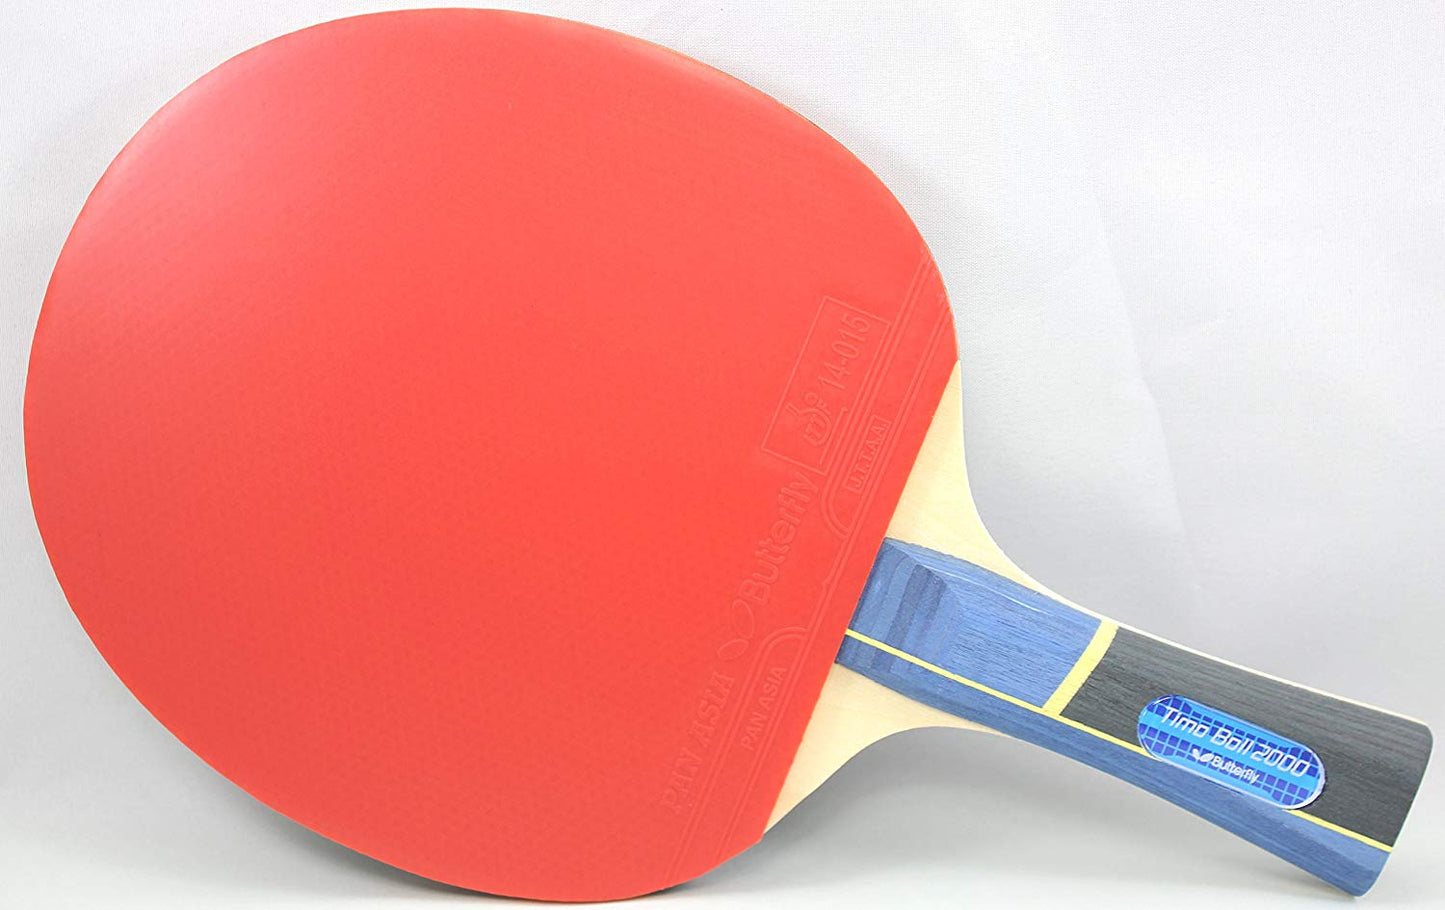 Butterfly Timo Boll 2000 Table Tennis Bat With 2 Balls - Best Price online Prokicksports.com